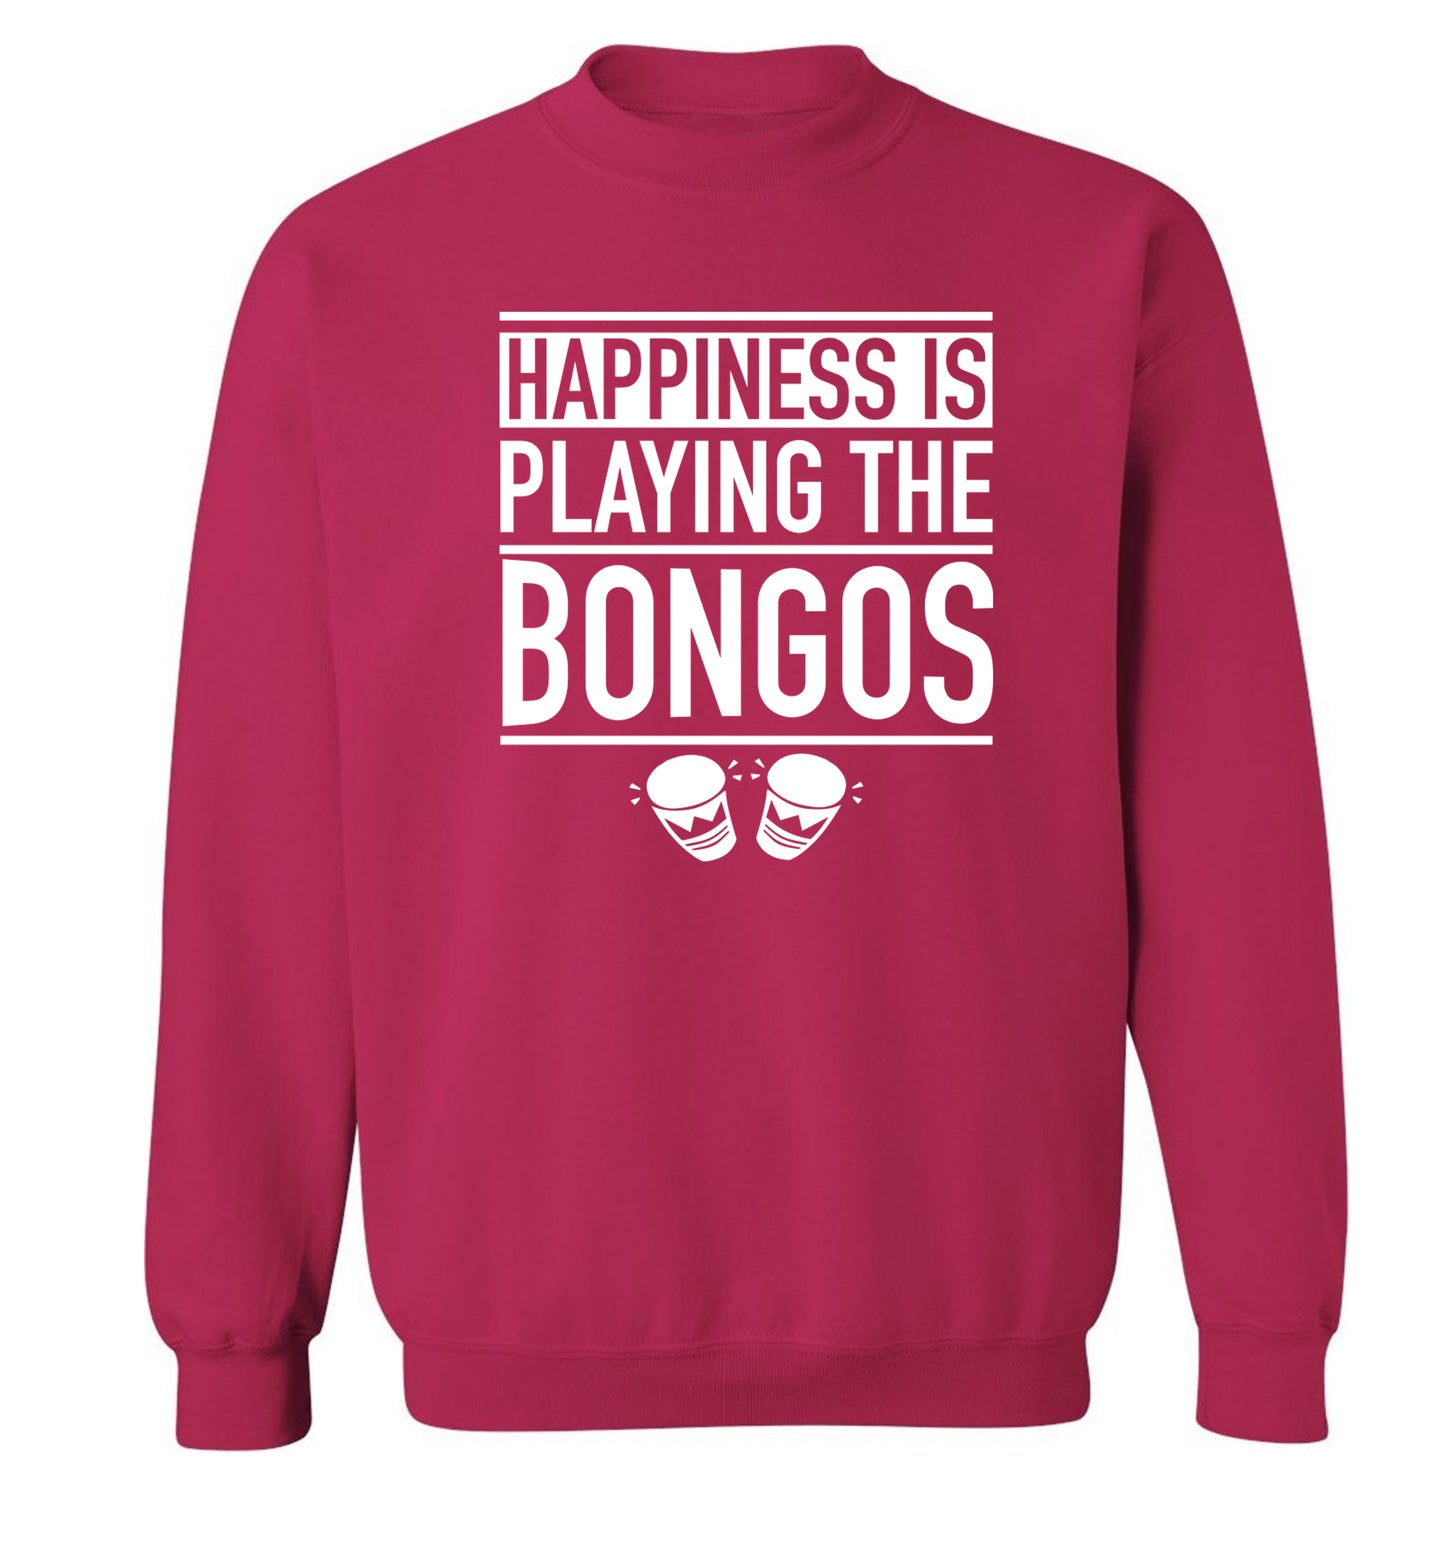 Happiness is playing the bongos Adult's unisex pink Sweater 2XL